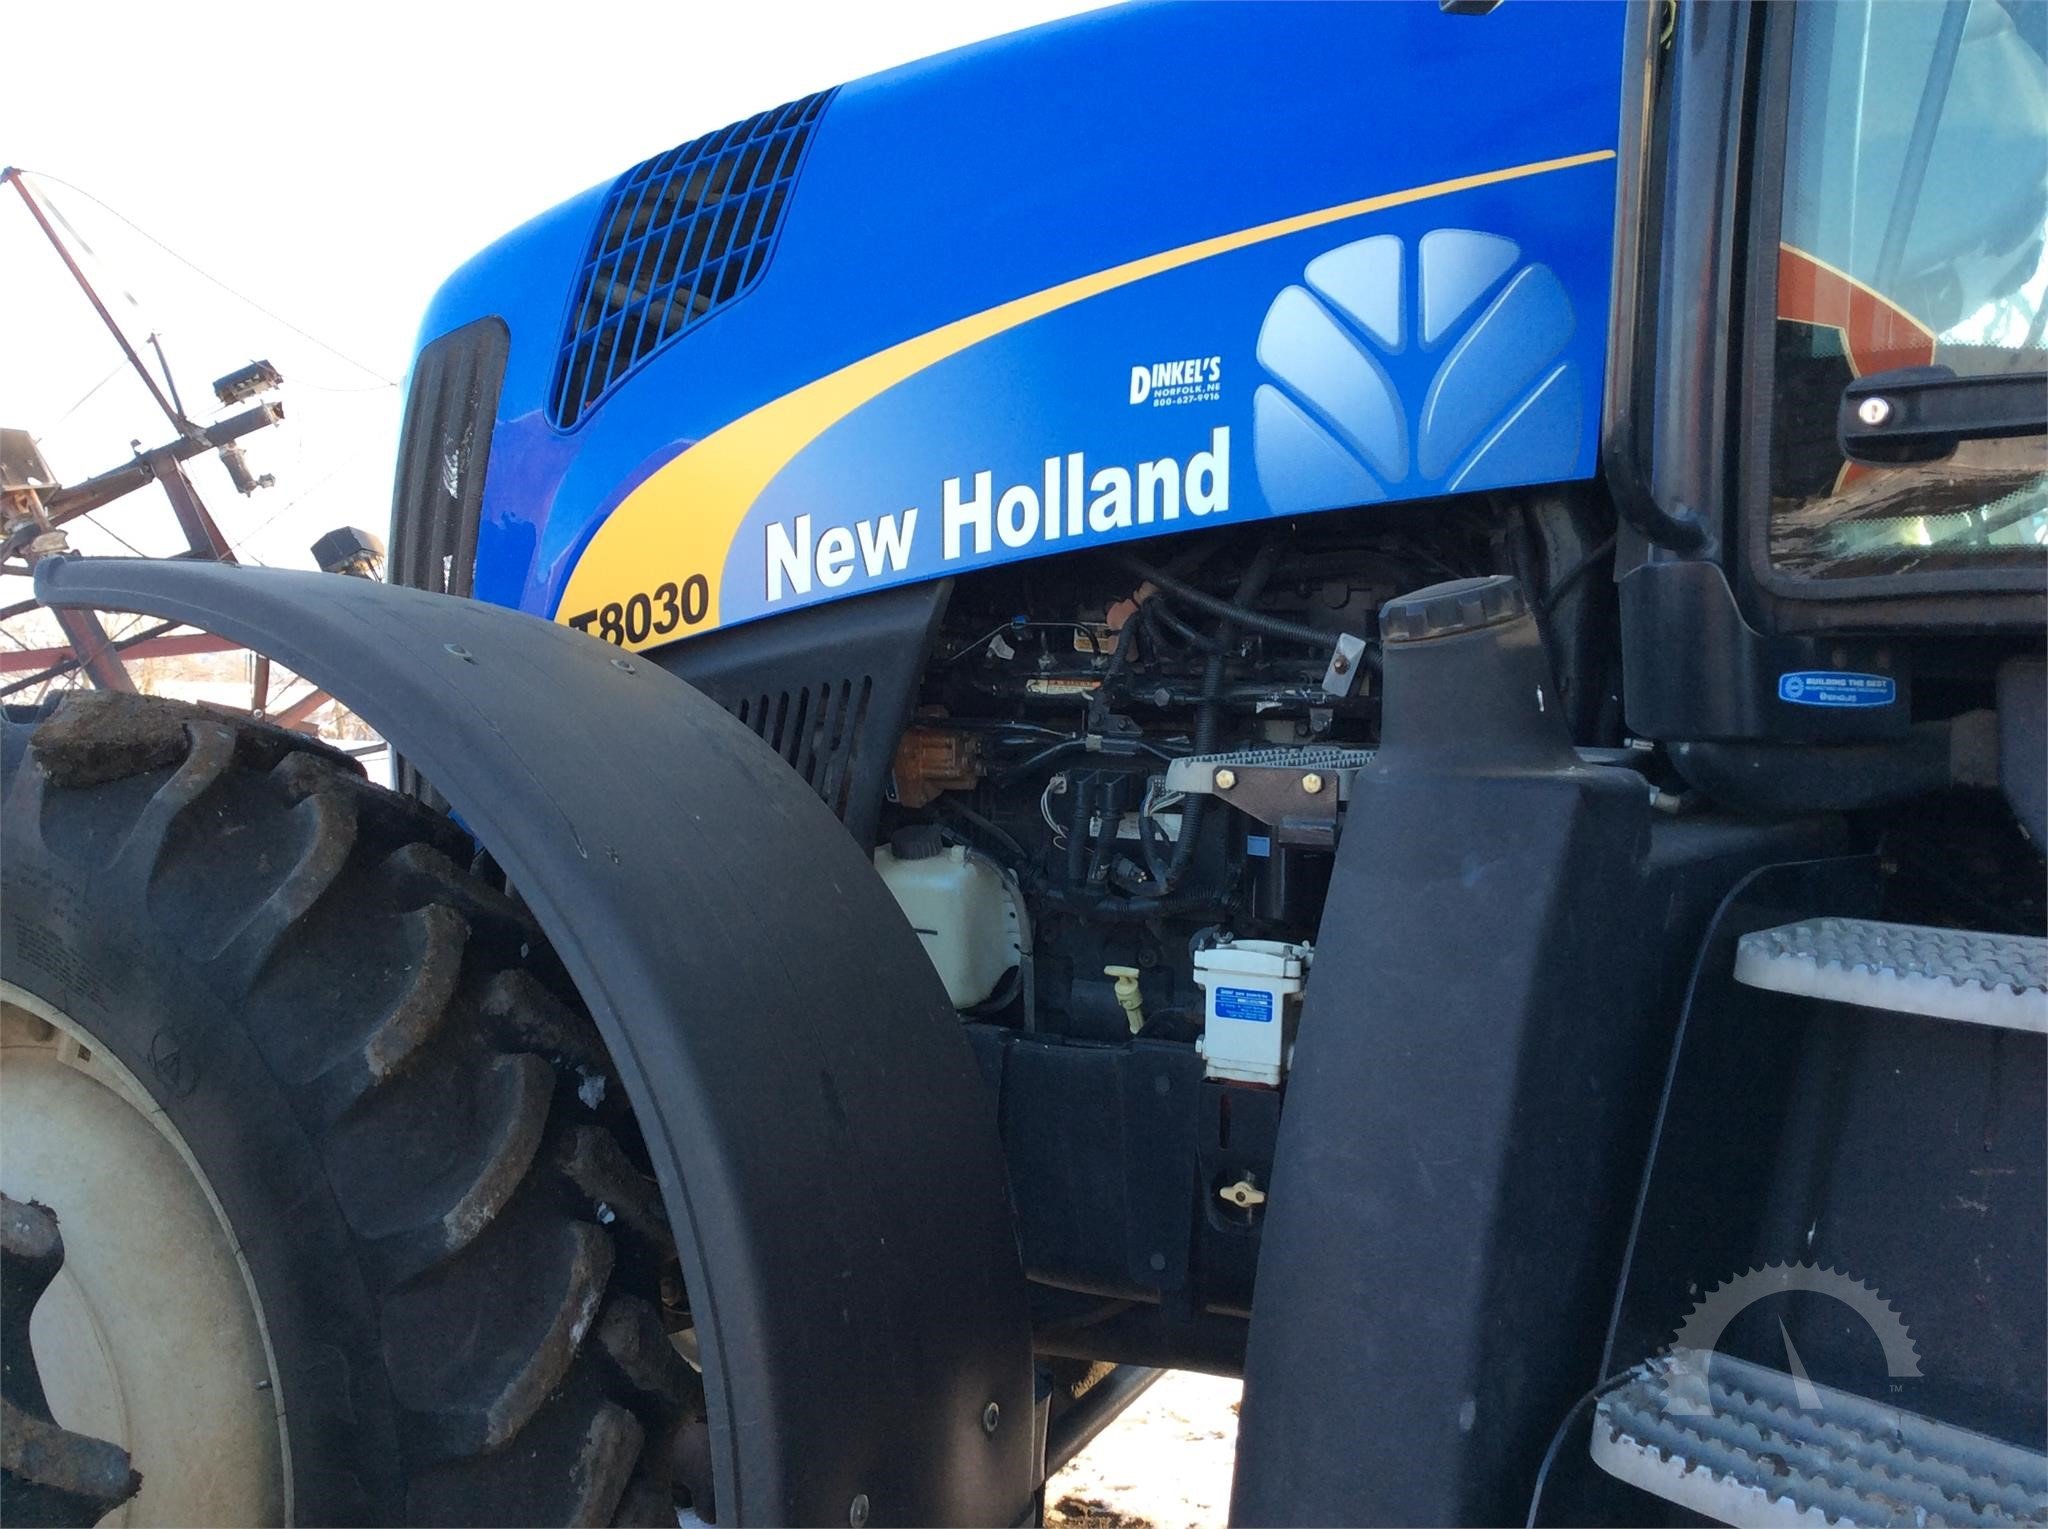 AuctionTime.com | NEW HOLLAND T8030 Online Auction Results